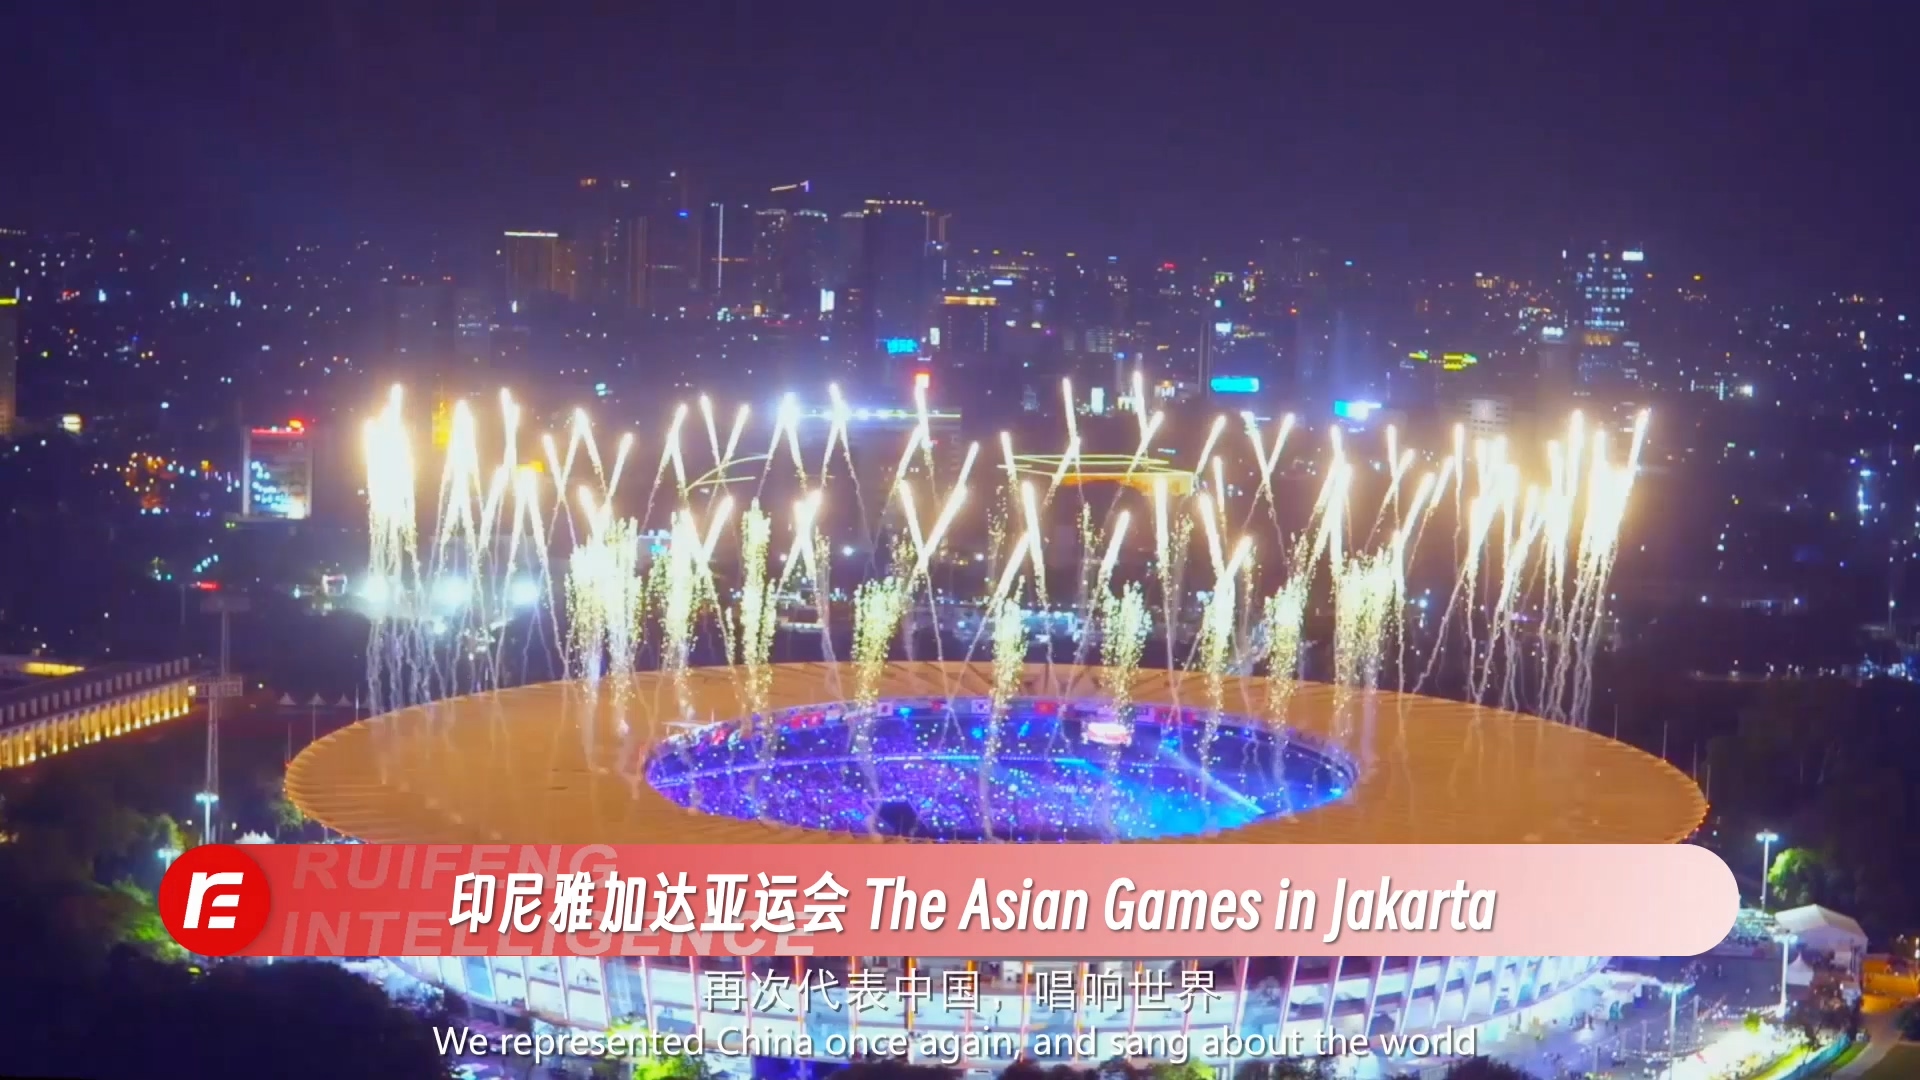 The Asian games in Jakarta